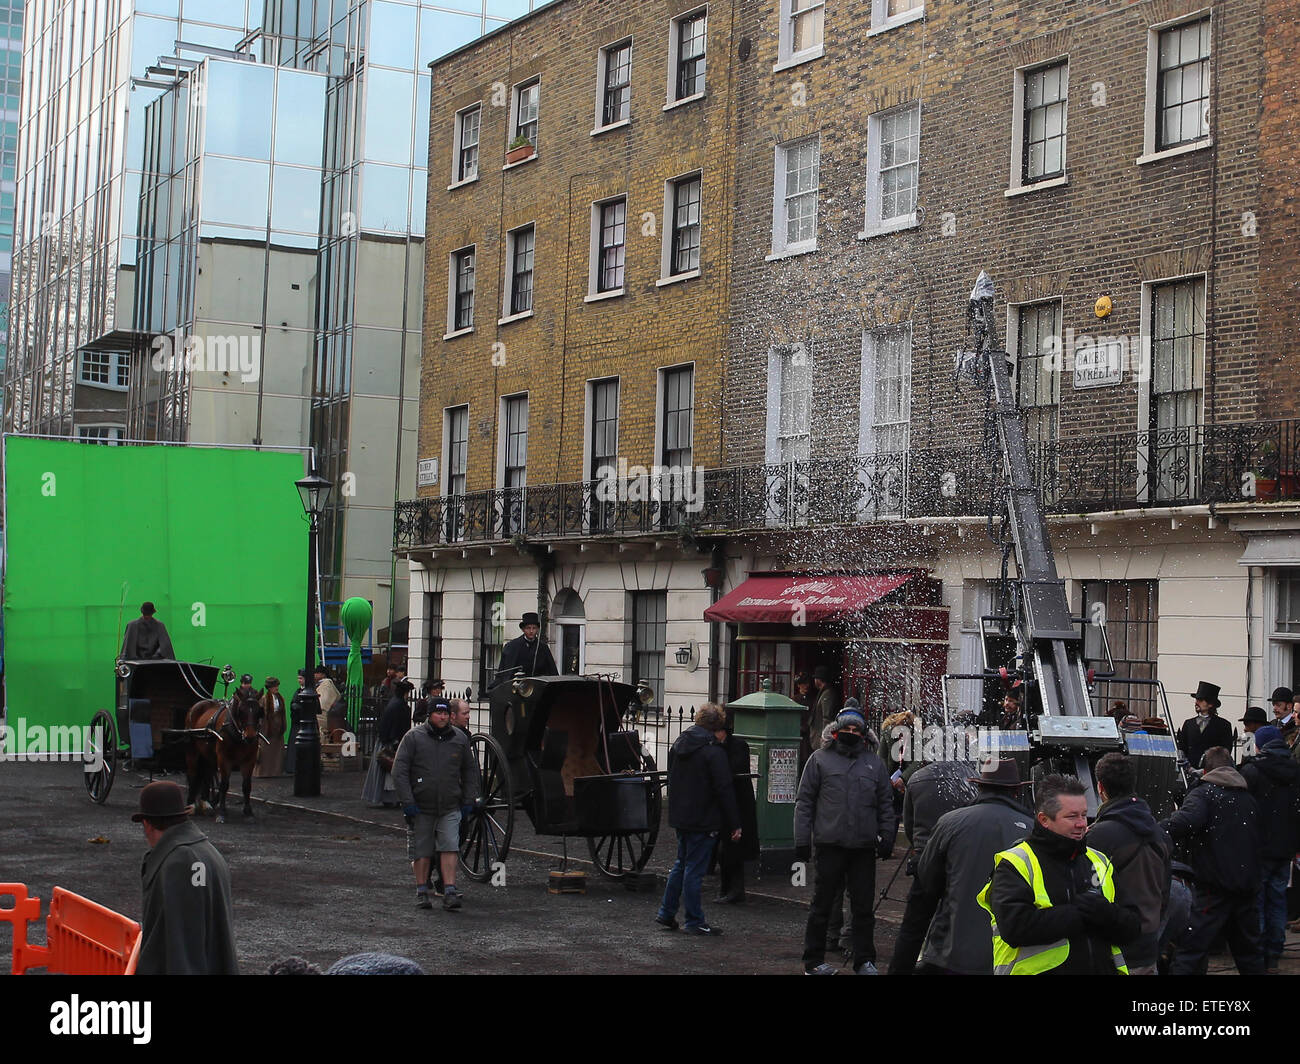 Benedict Cumberbatch and Martin Freeman film a scene for the 'Sherlock' christmas special in London  Featuring: View Where: London, United Kingdom When: 07 Feb 2015 Credit: WENN.com Stock Photo